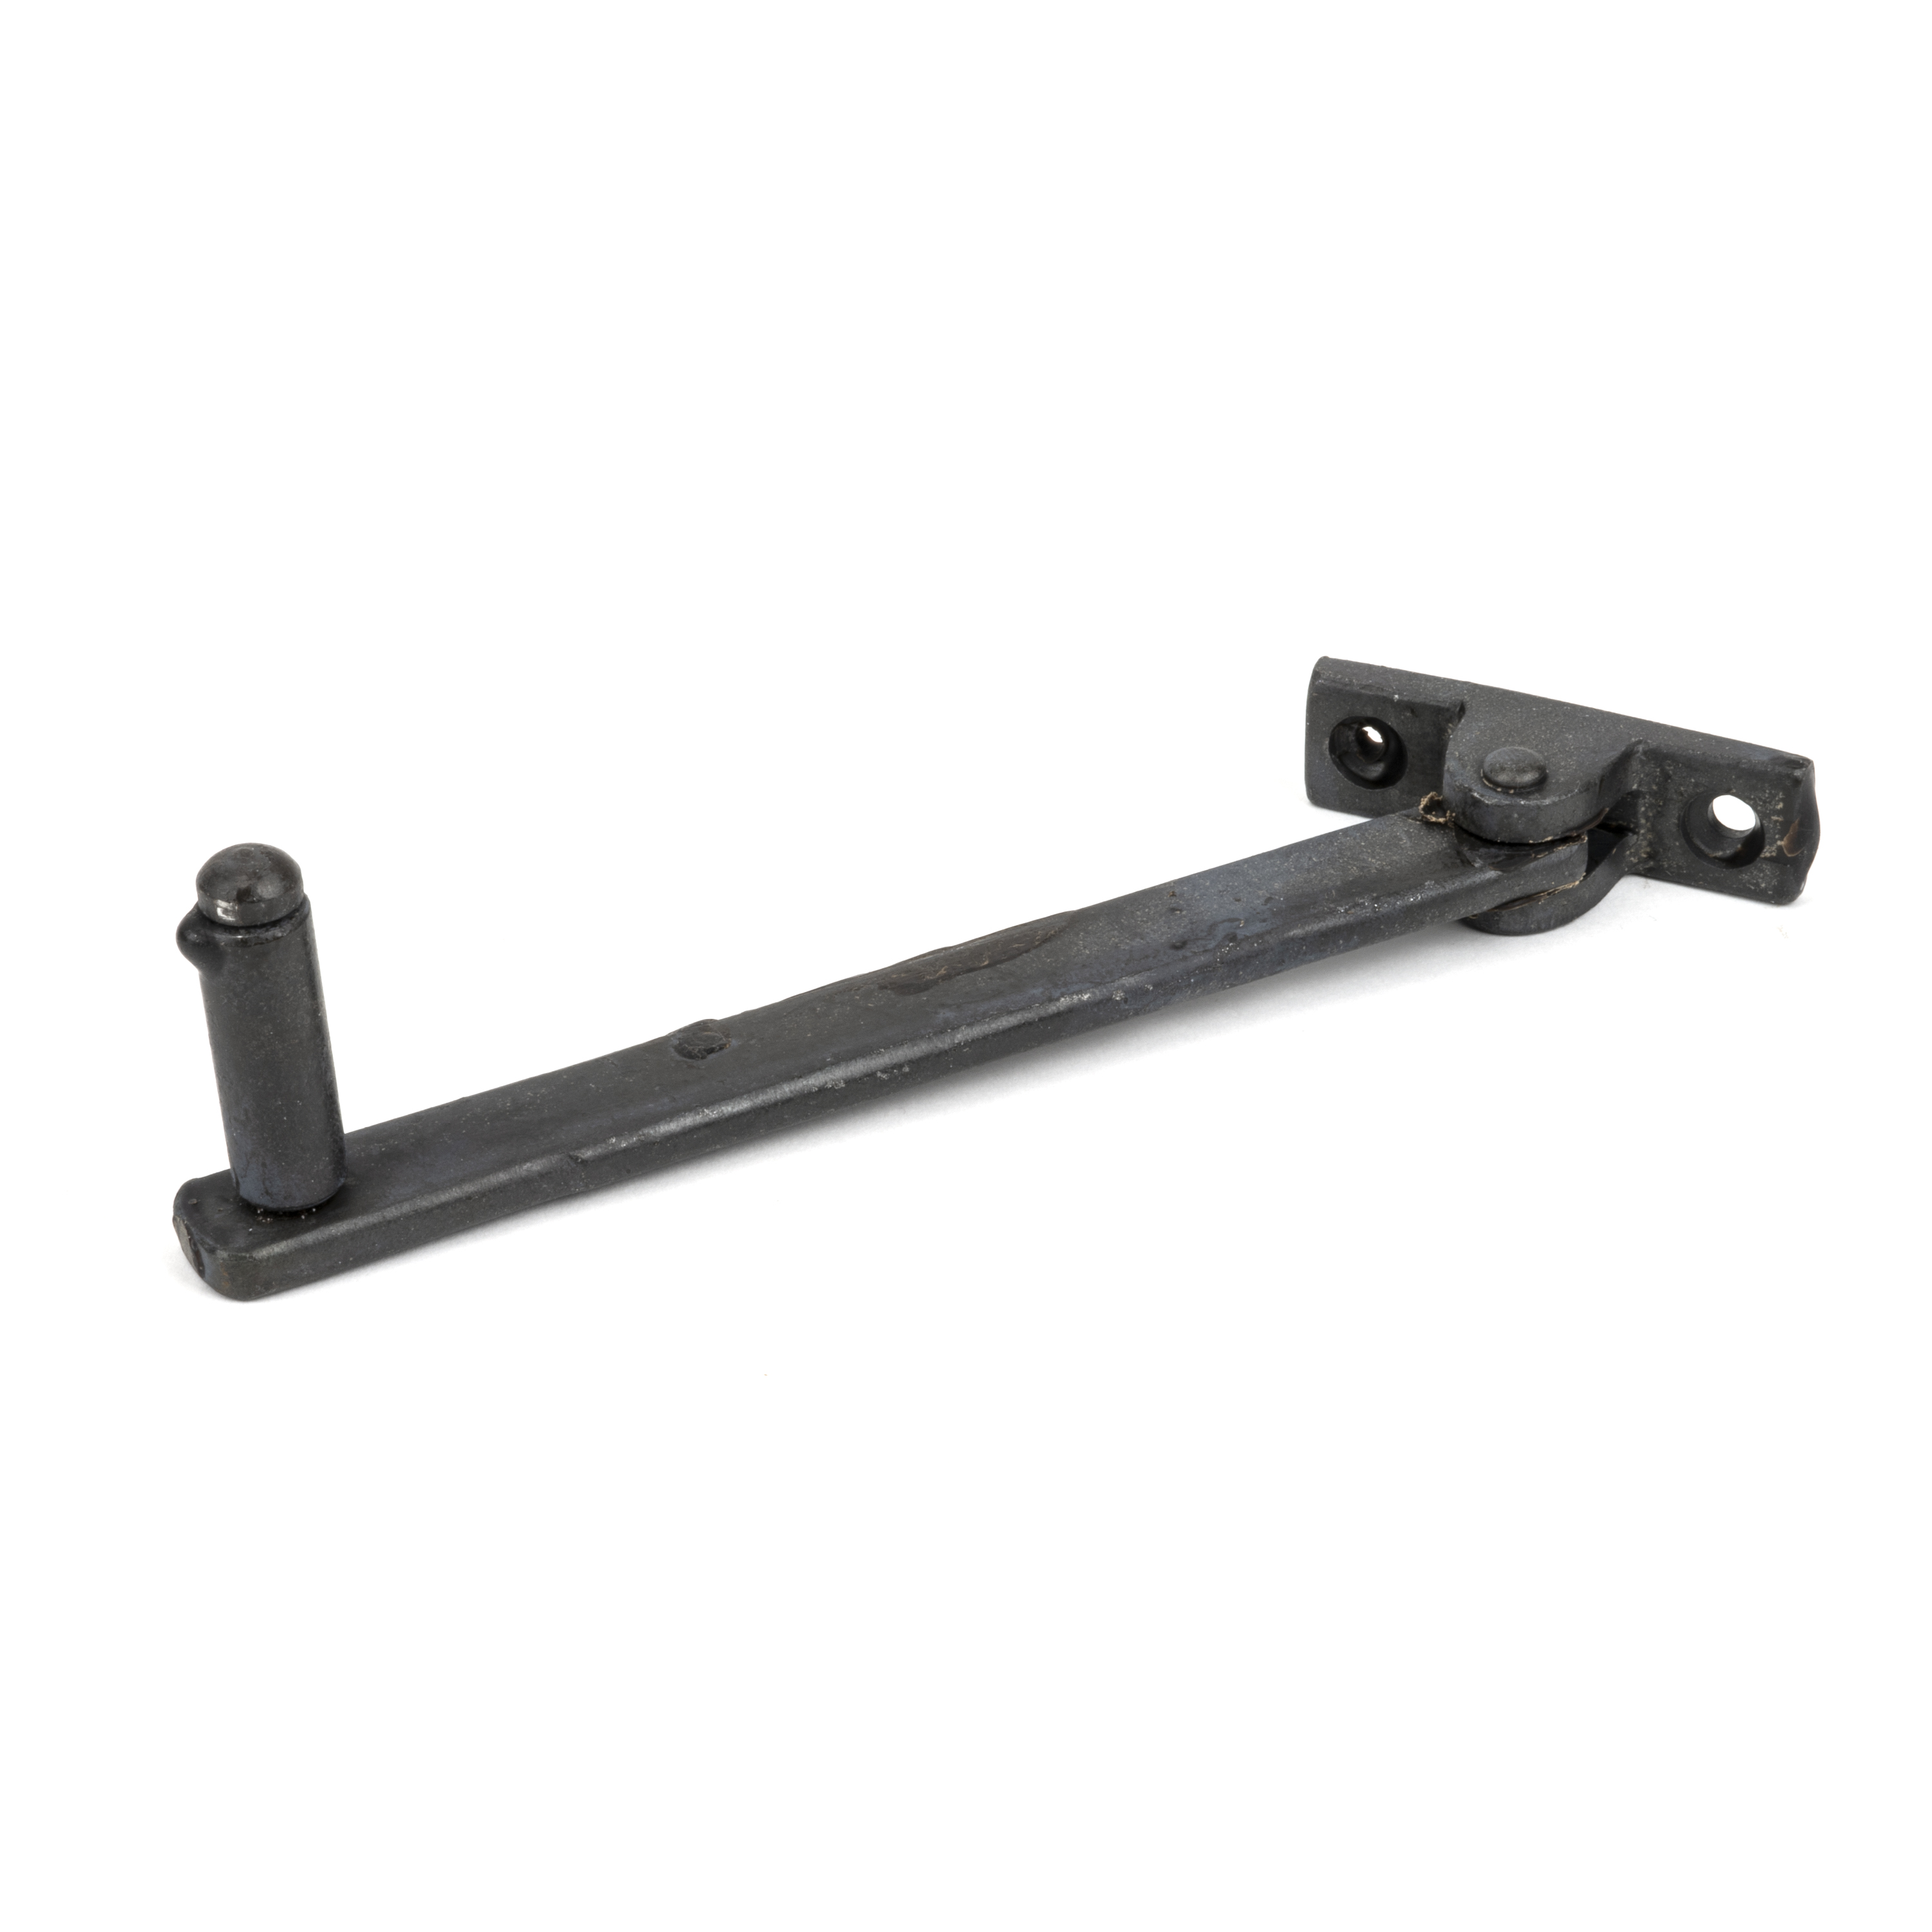 Roller Arm Stay - 6"